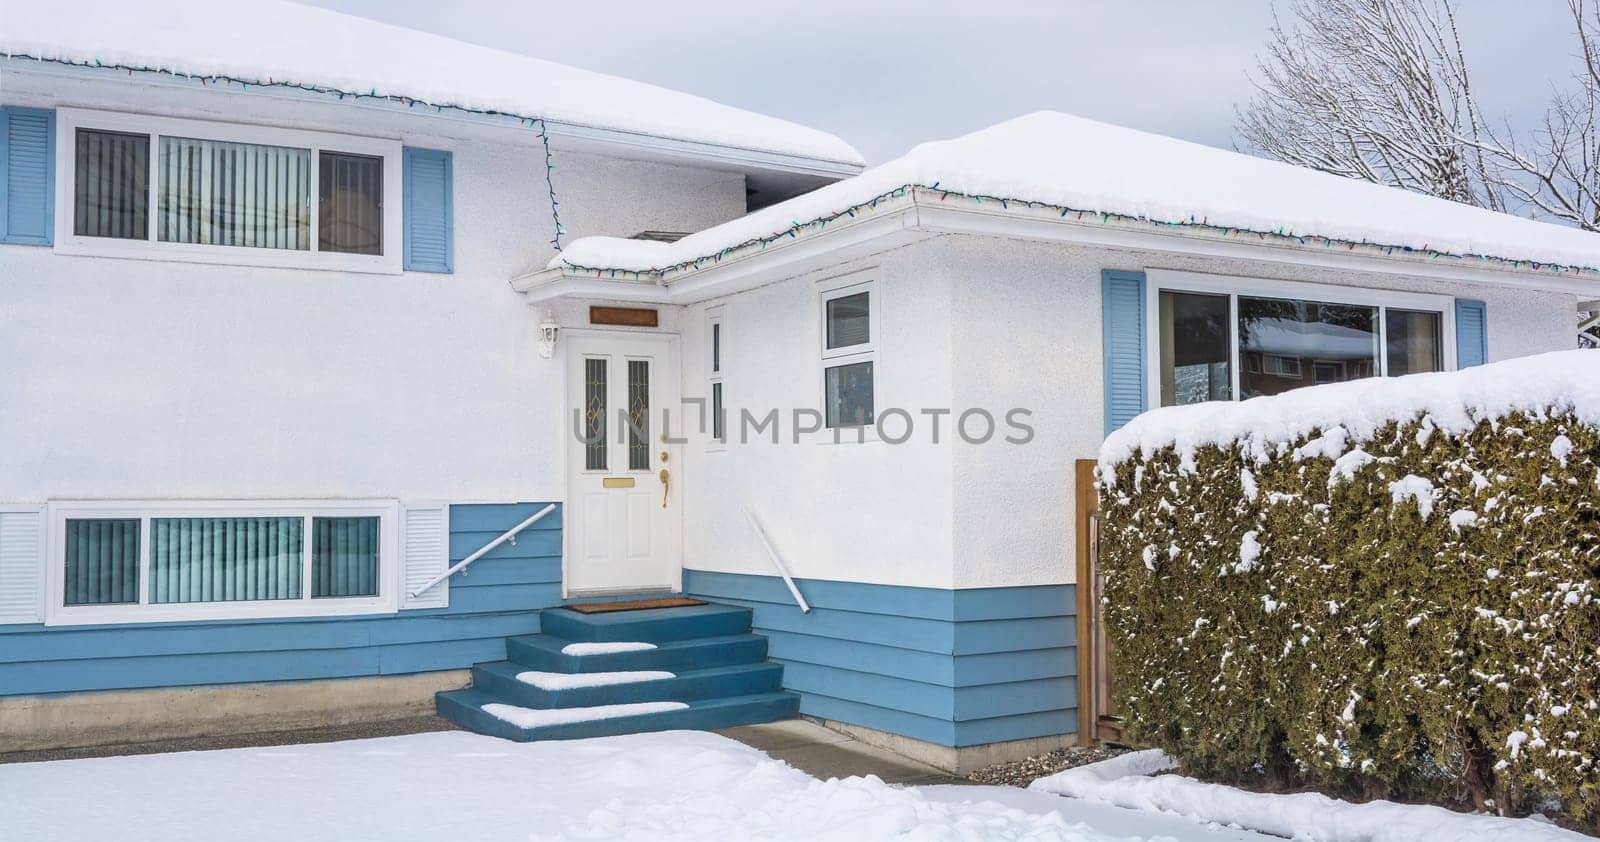 Family residential house with front yard in snow. Beautiful North American house on winter cloudy day